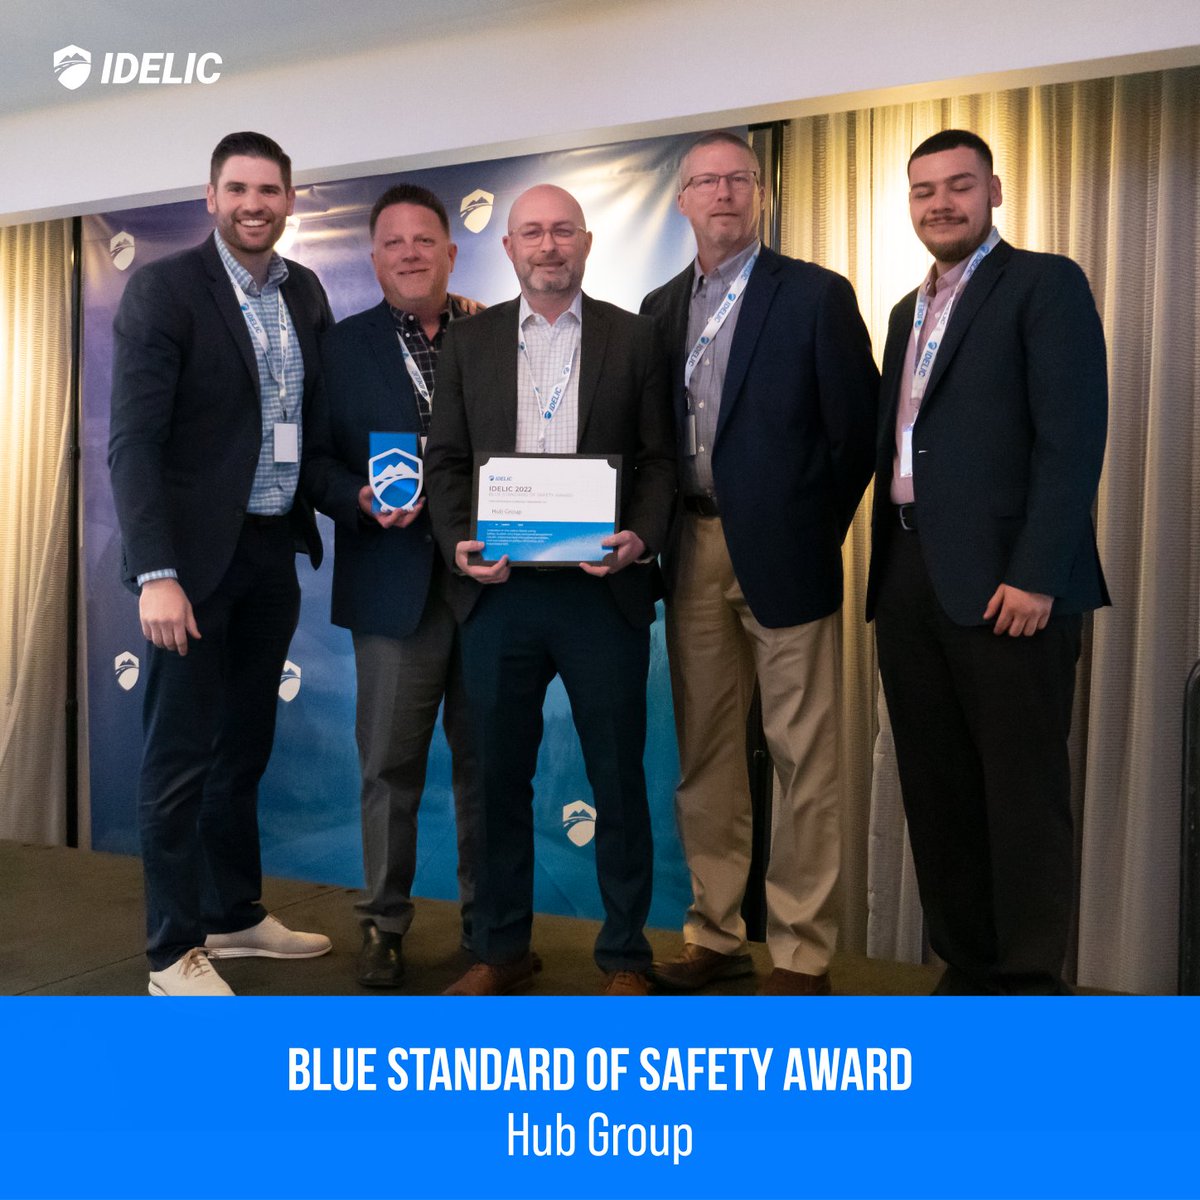 We were excited to be awarded @Idelictech's Blue Standard of Safety Award, given annually to the safest fleets using Safety Suite® who have achieved exceptional results. Congratulations to our team members on continuing to make safety our top priority. #TheWayAhead #HubGroup